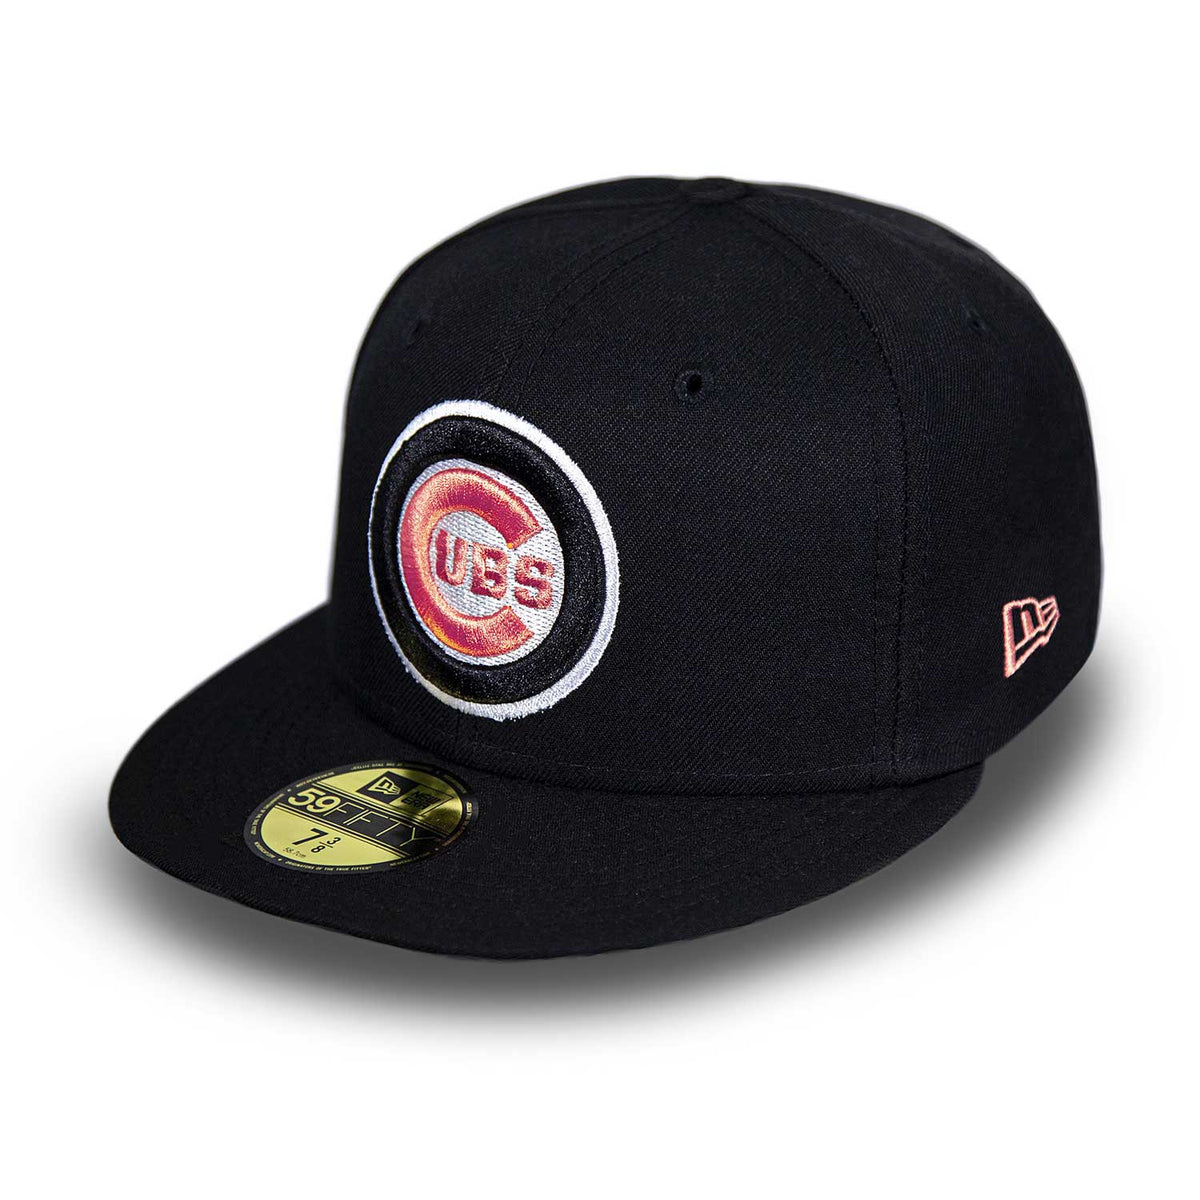 Chicago Cubs Black & Peach Bullseye 59FIFTY Fitted Cap 7 1/2 = 23 1/2 in = 59.7 cm